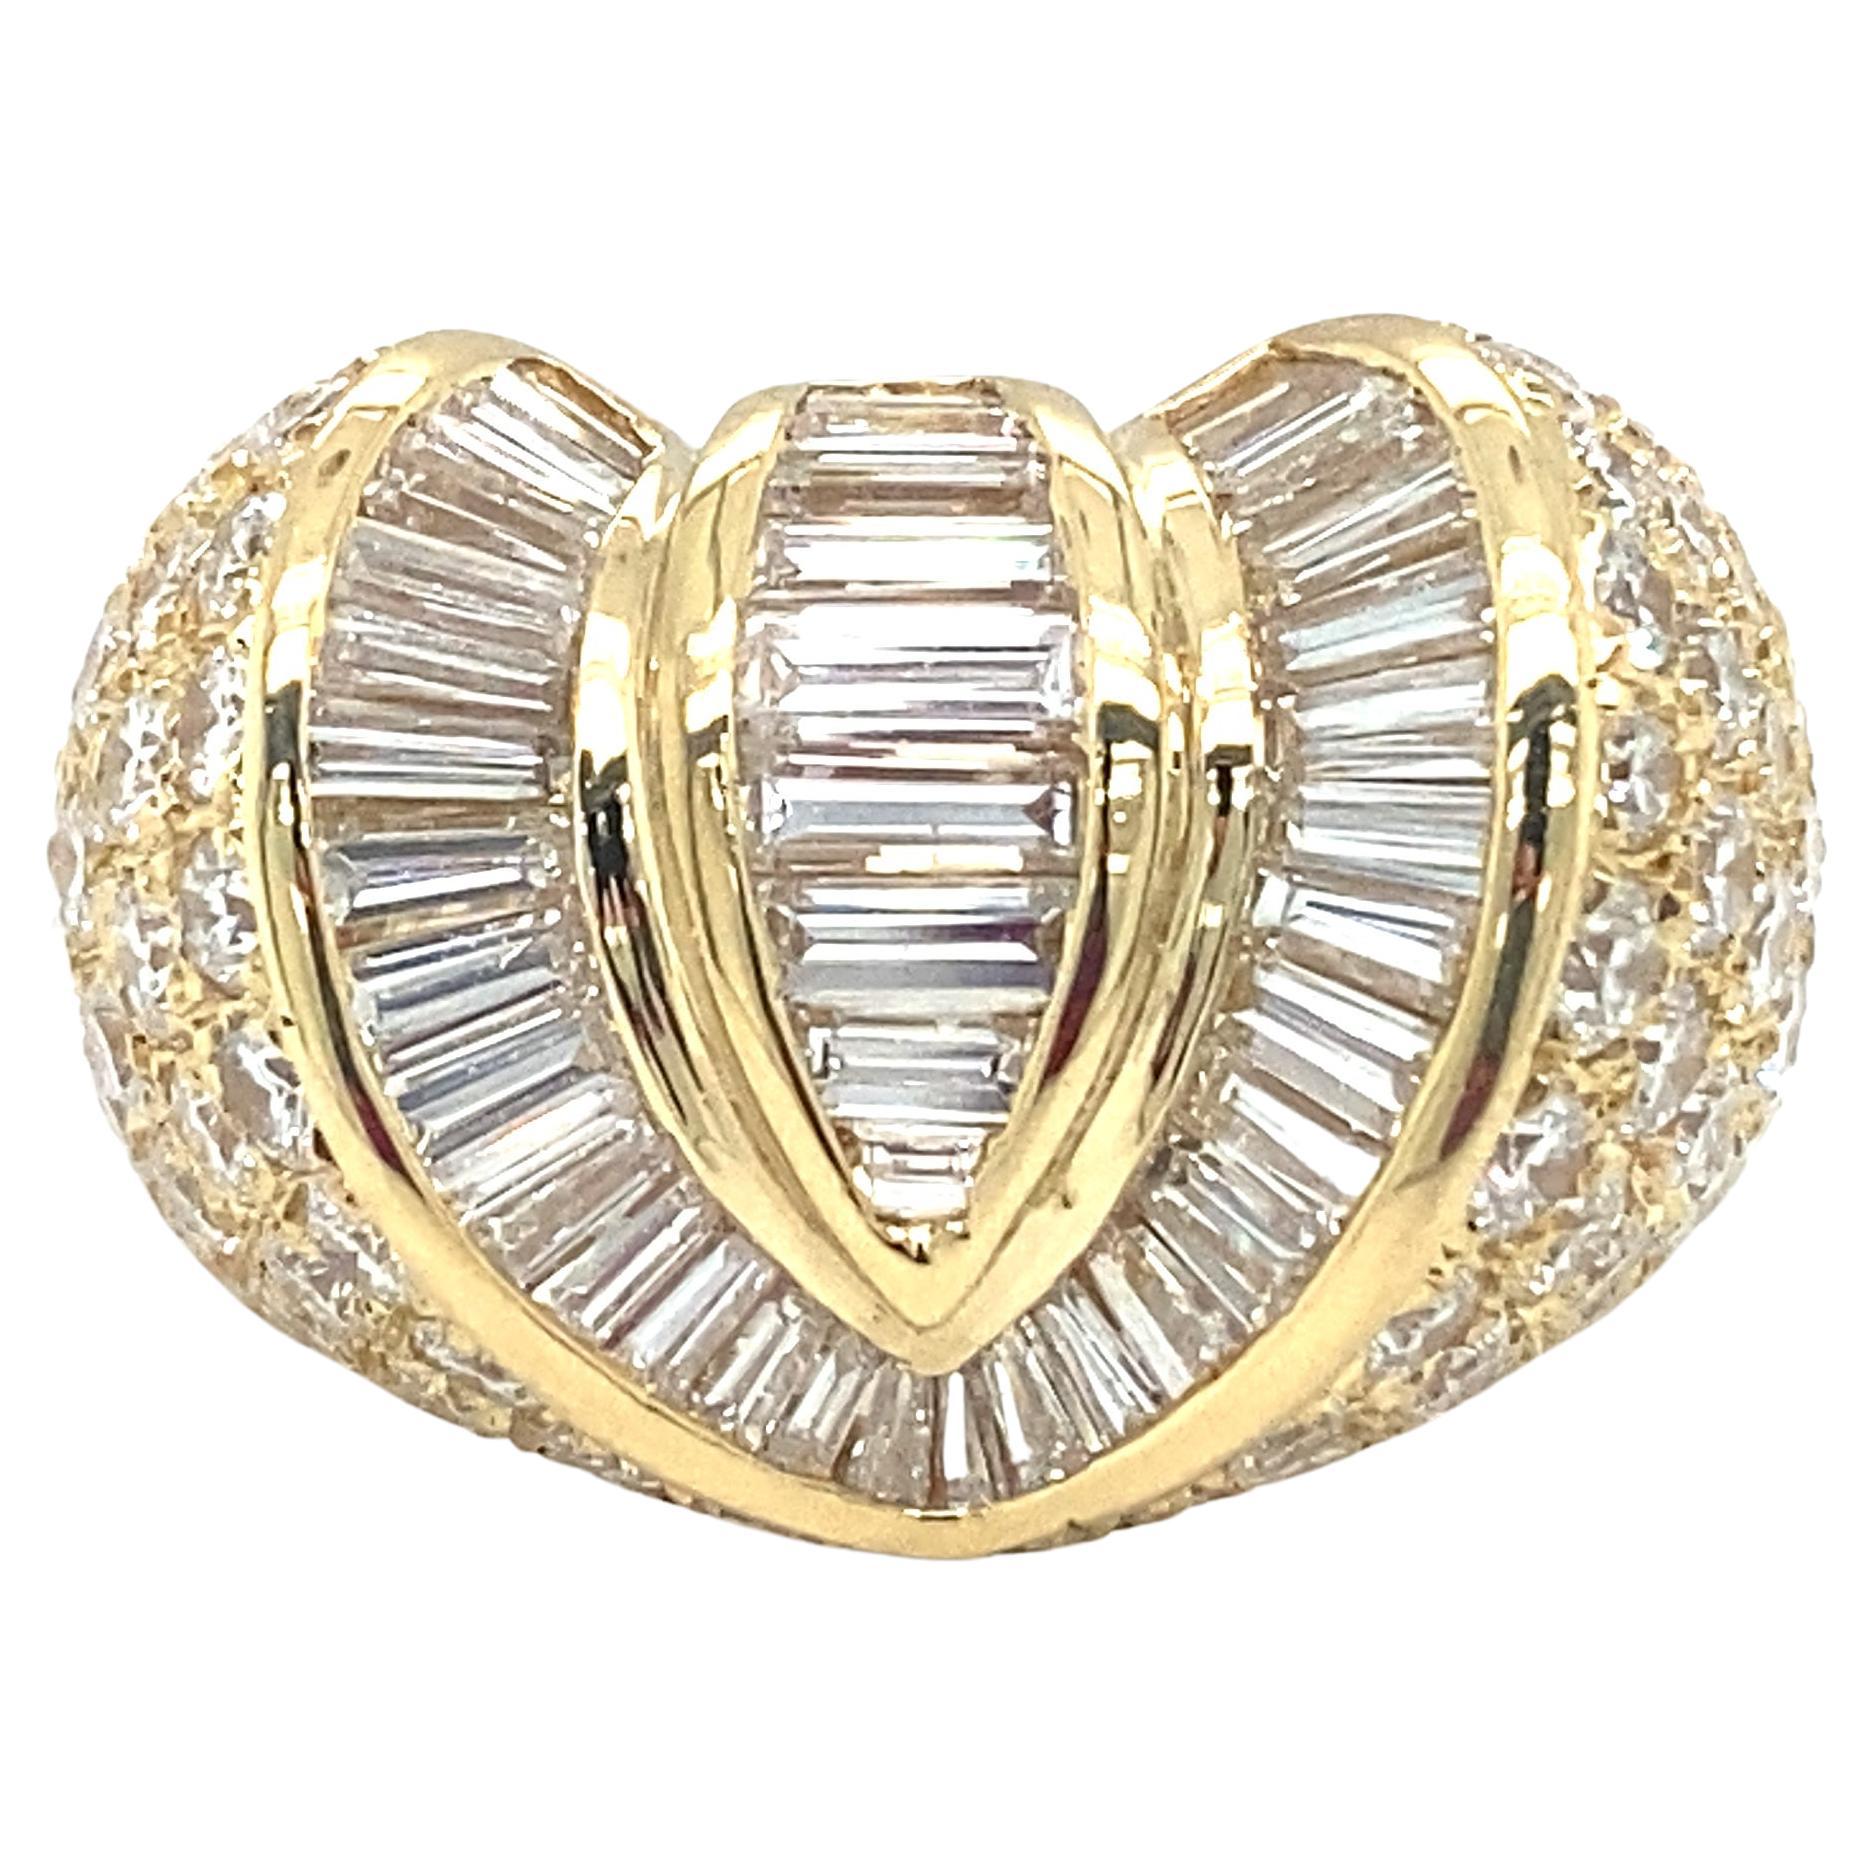 Circa 1980s 7.0 Ctw Diamond Statement Ring in 18K Gold For Sale